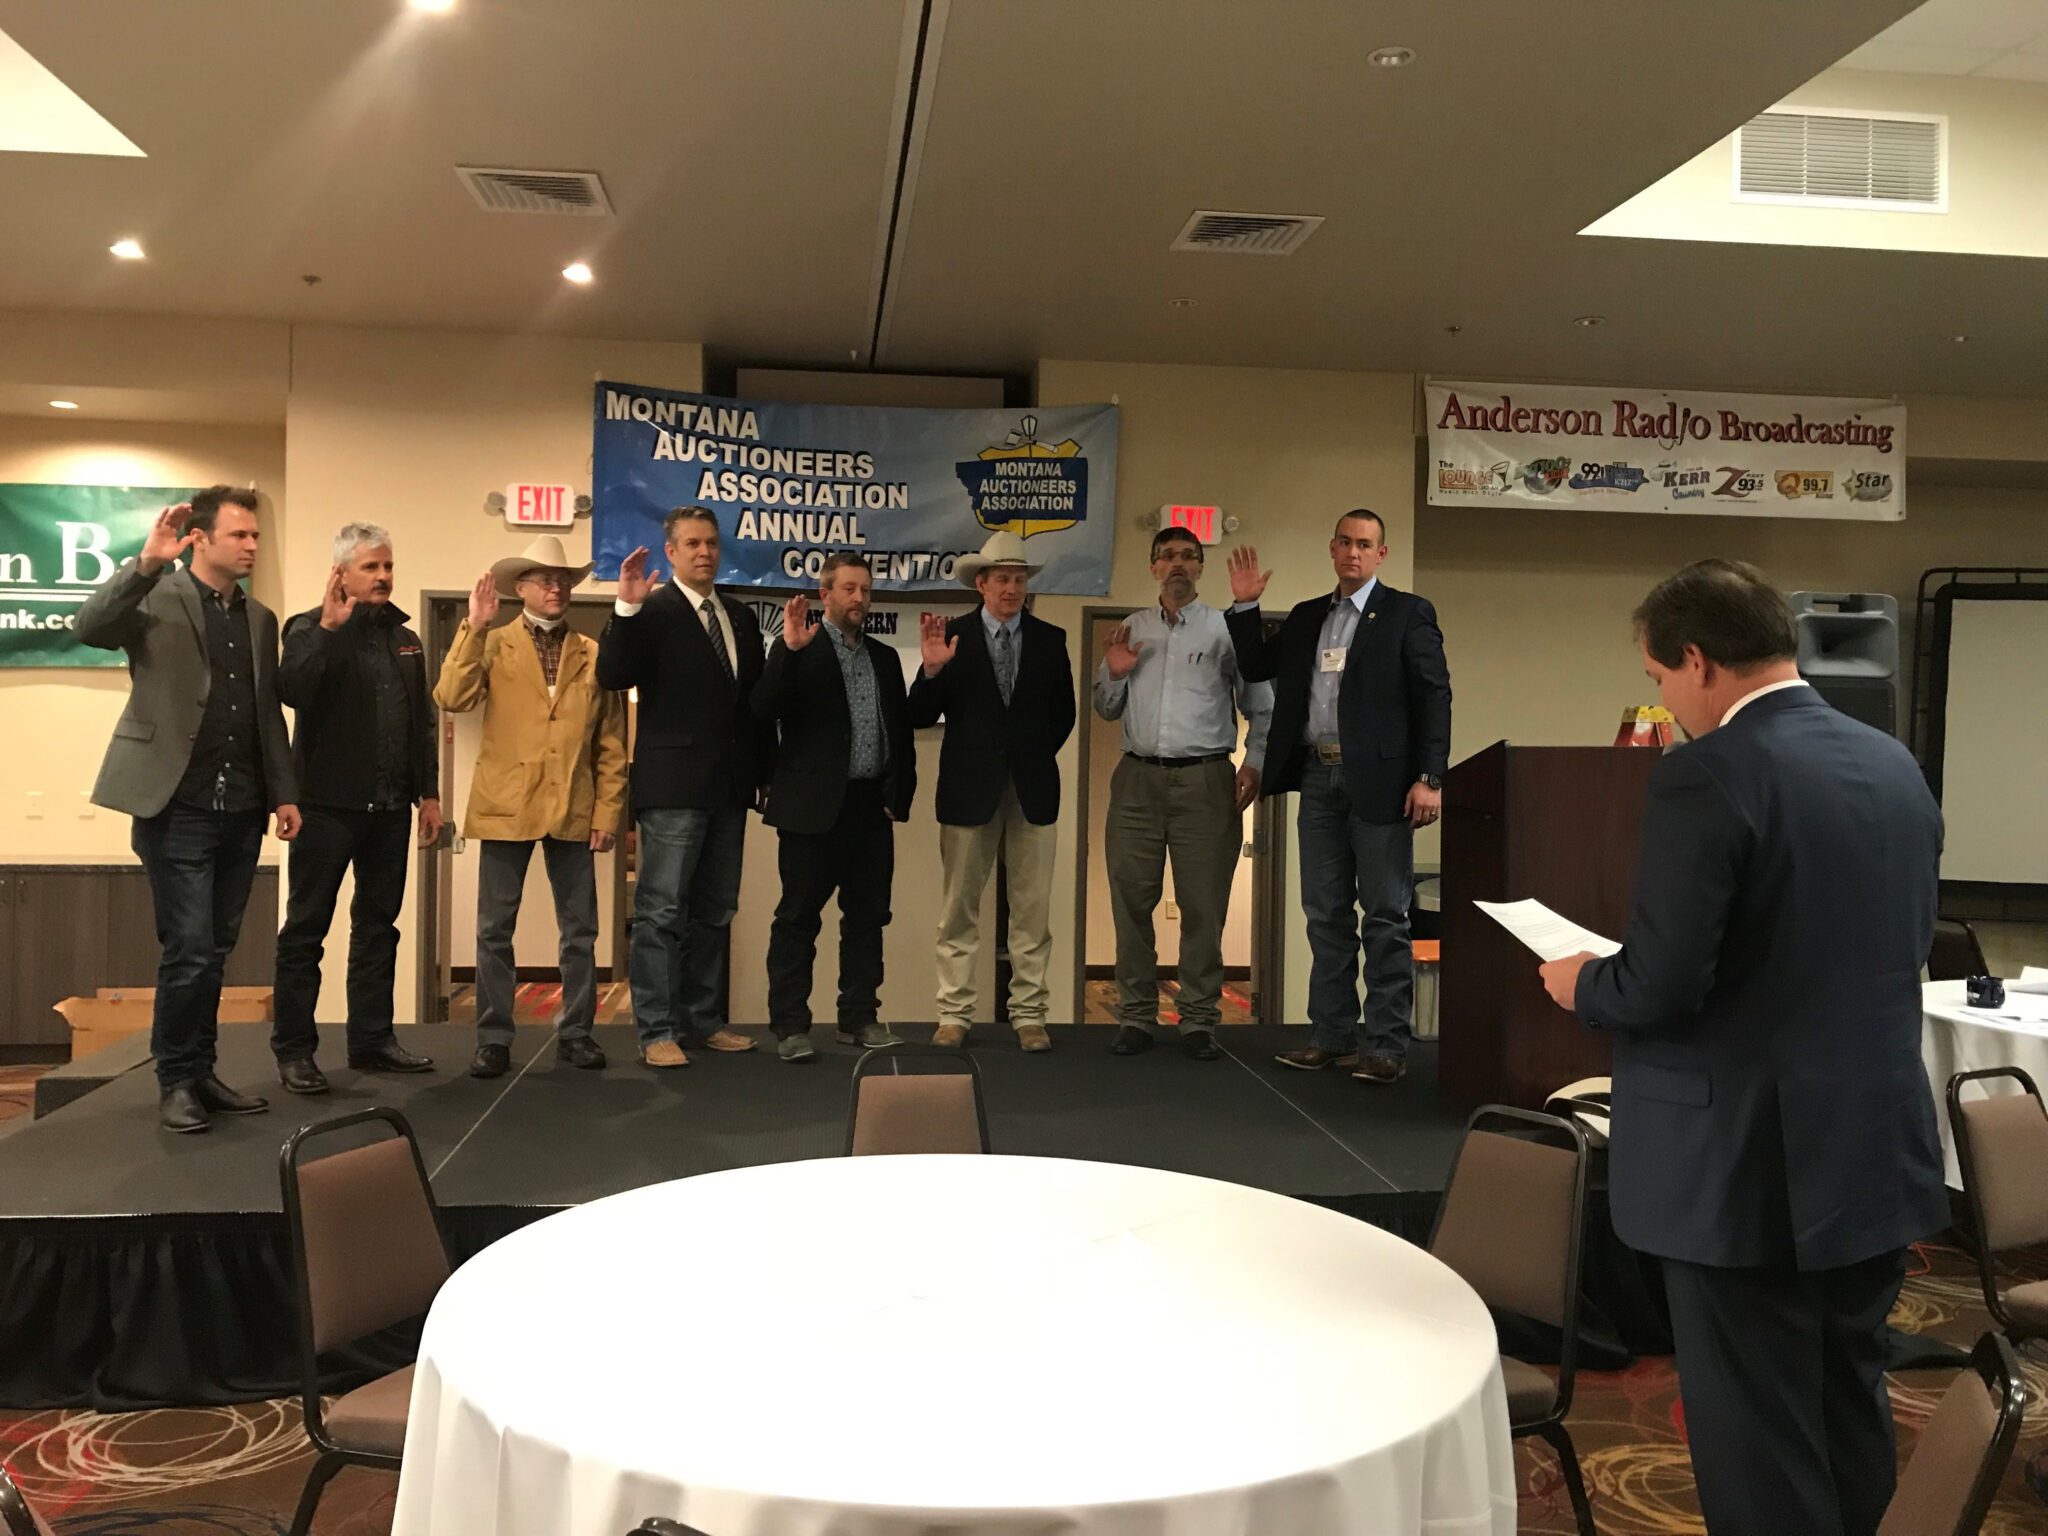 Tim Mast swears in the 2019 Montana Auctioneer Board of Directors. Left to right: Wade Affleck, Merton Musser, Robert McDowell III, JK Kinsey, Brian Young, Kevin Hill, Gideon Yutzy and Reed Tobol